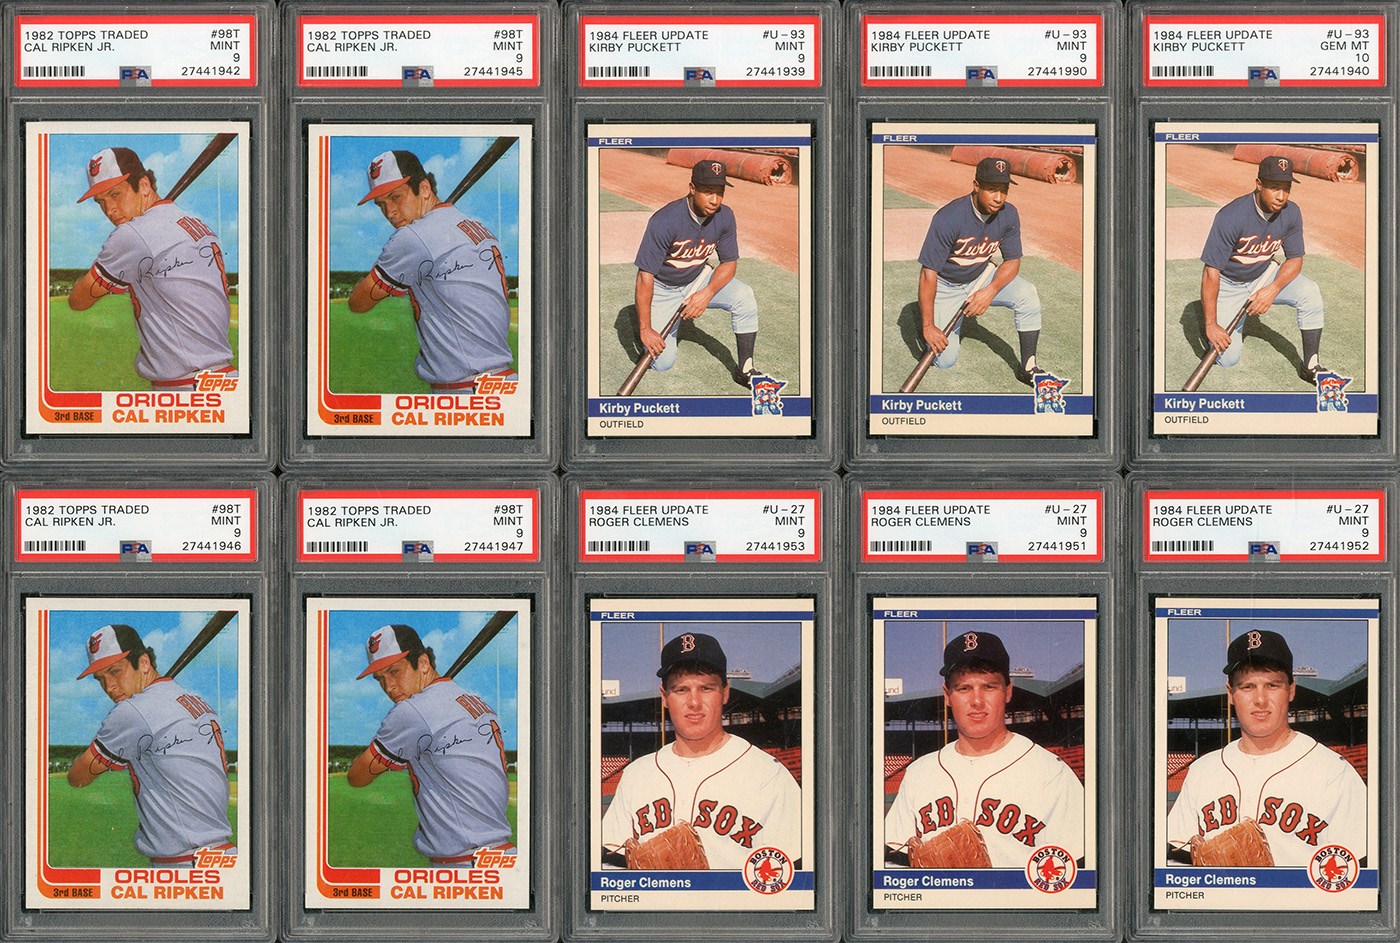 - 1982 Topps Traded (7) and 1984 Fleer Update (9) High Grade Sets with PSA Graded Key Cards including a PSA 10 Puckett